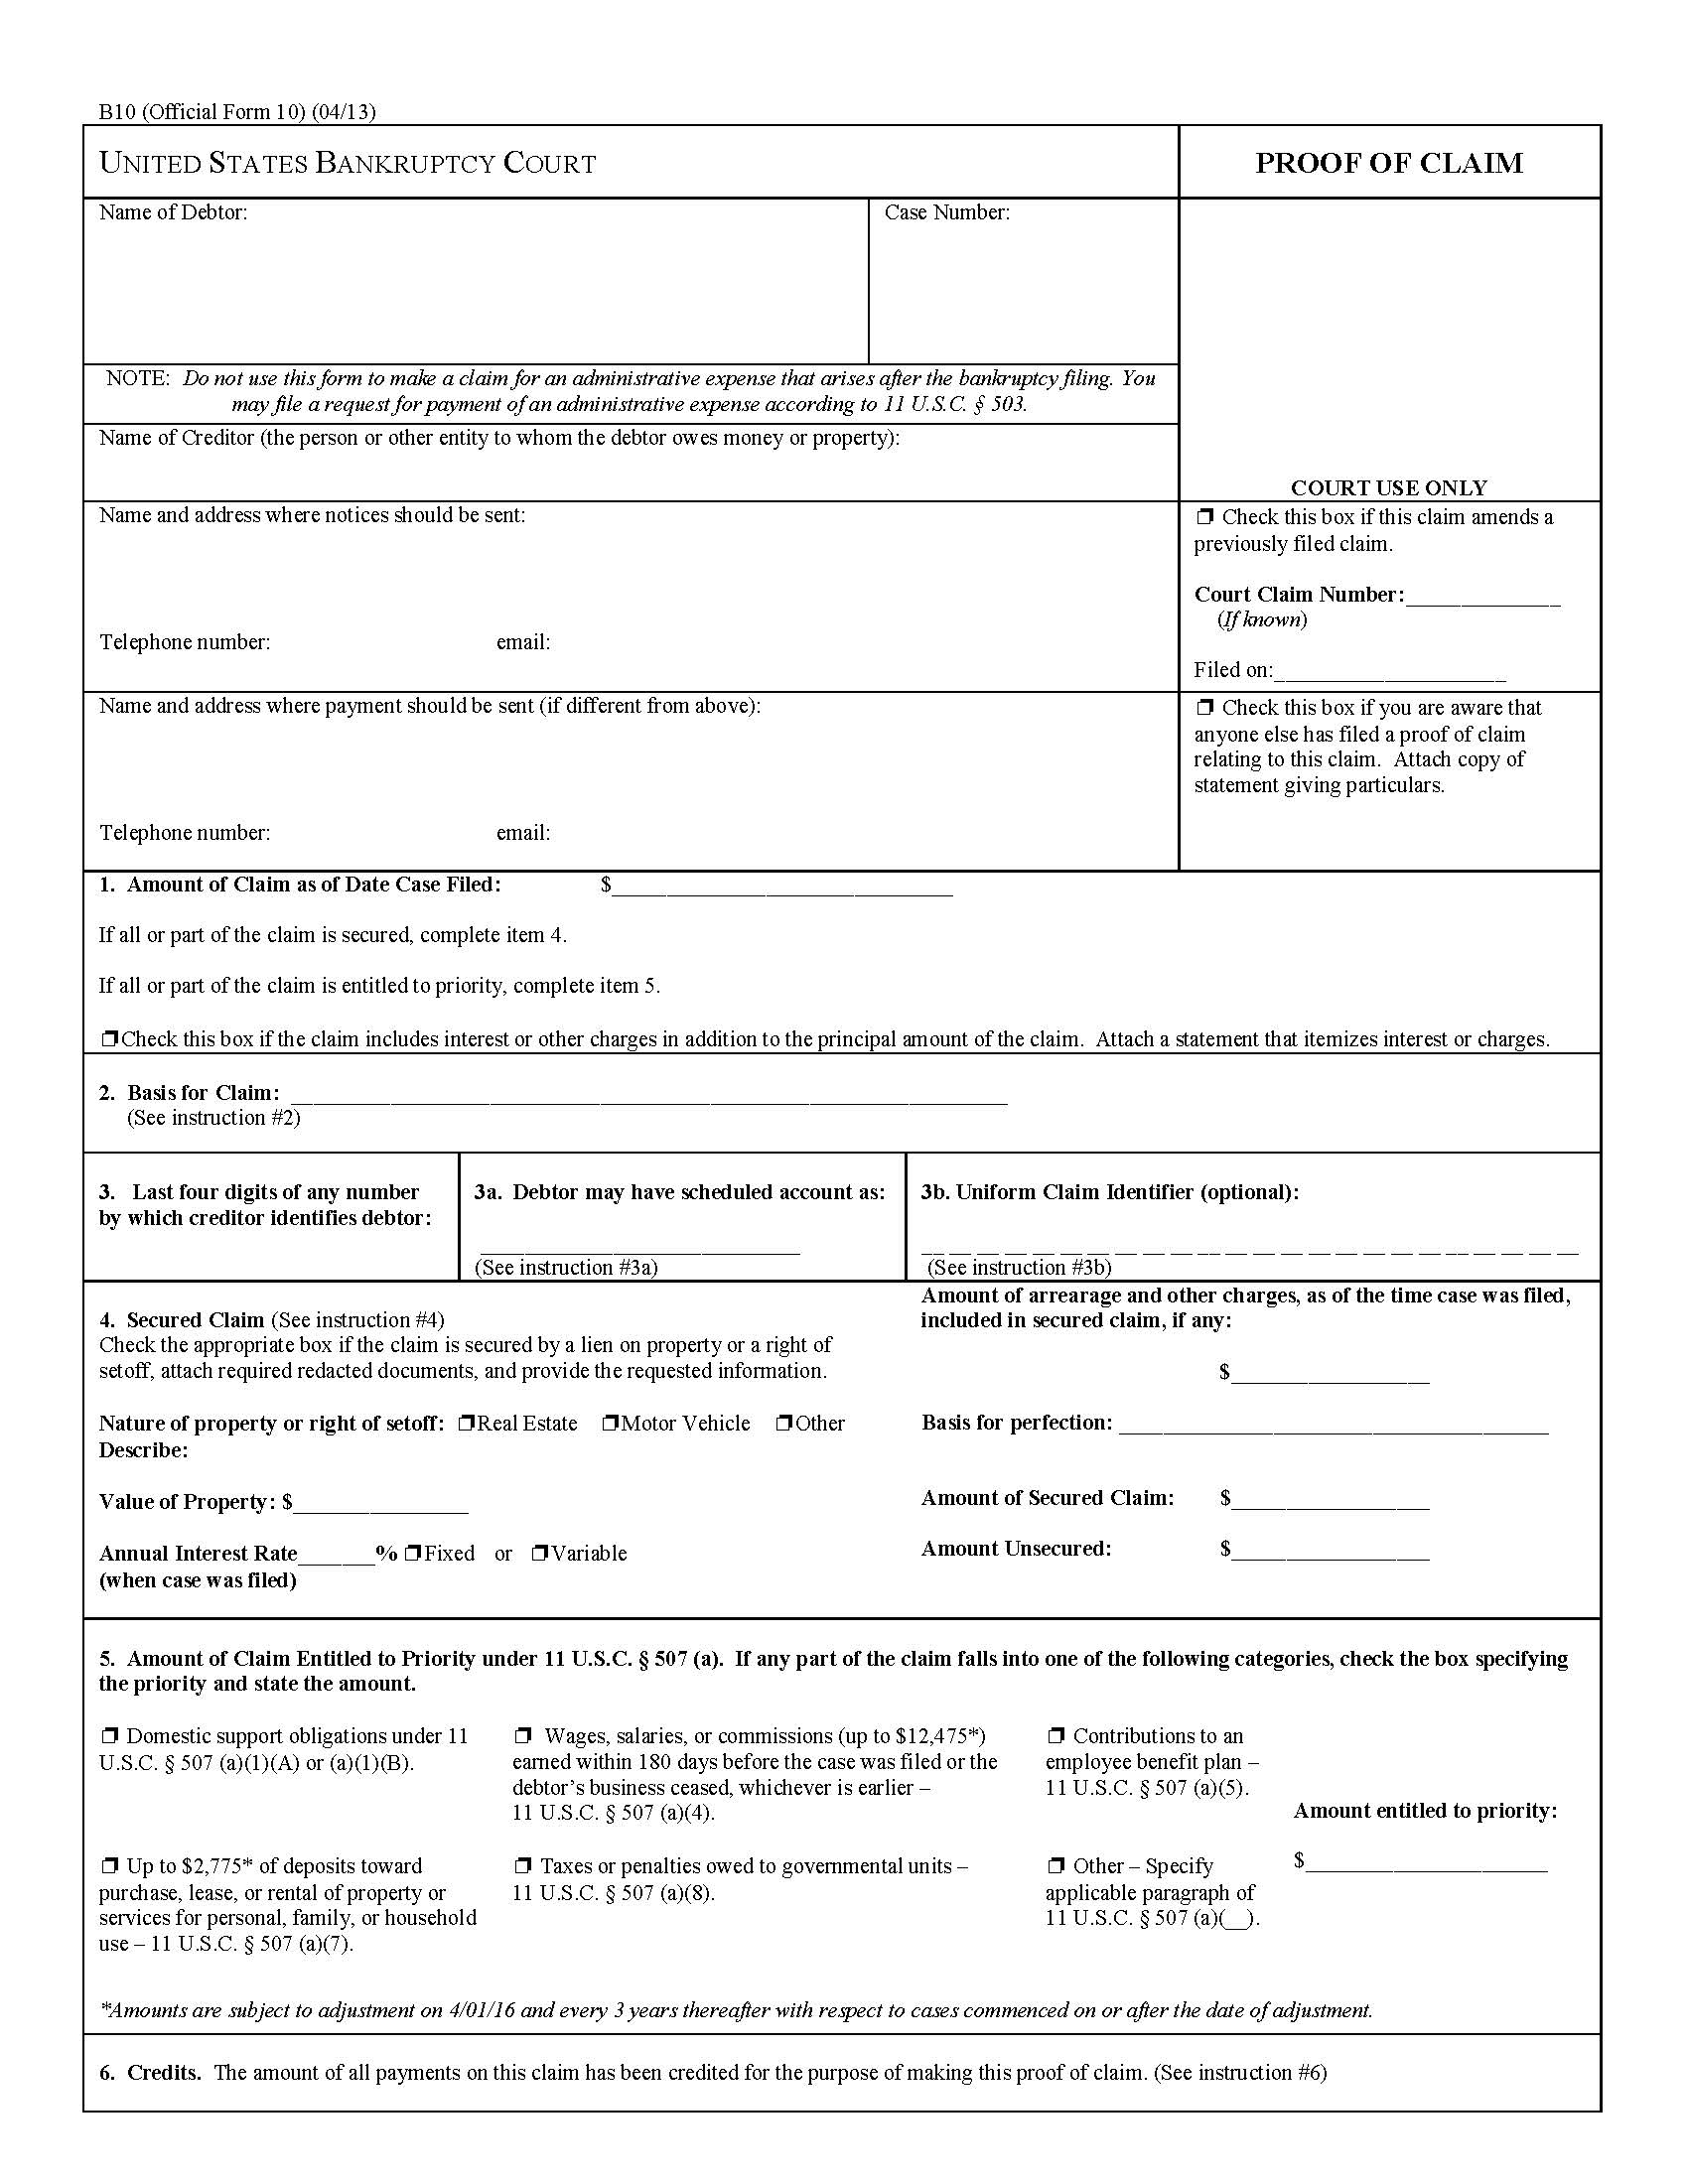 assignment for the benefit of creditors proof of claim form